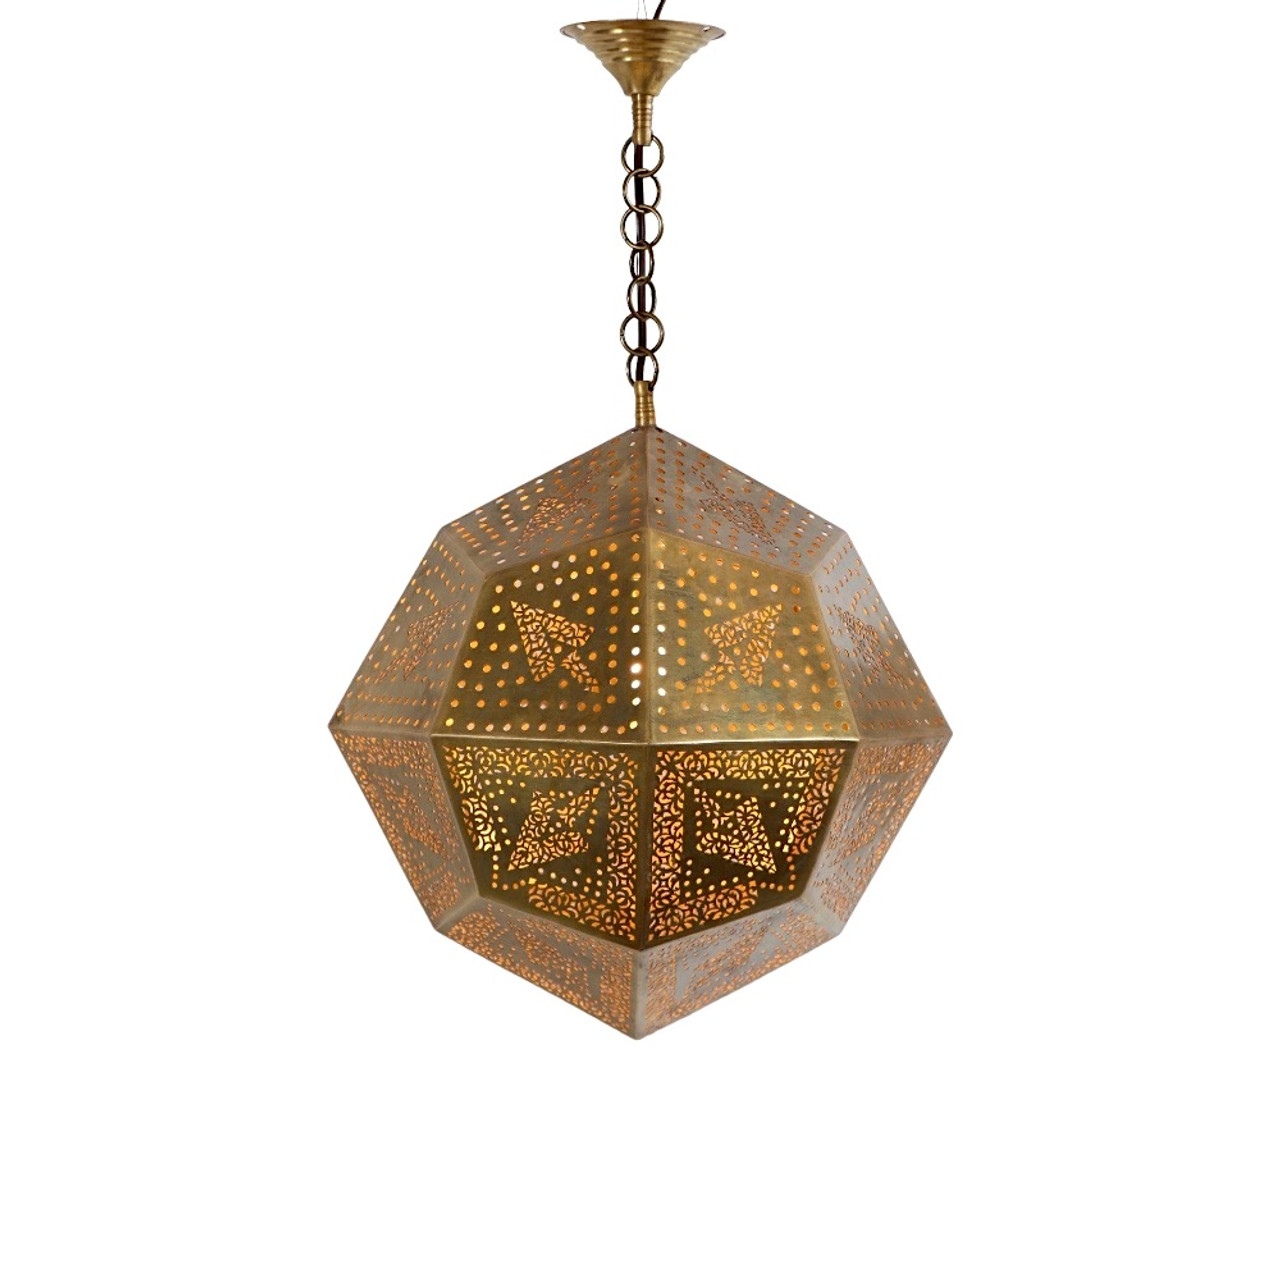  Hammered Brass Dome Light Fixtures Moroccan Ceiling Lights  Pendant Lights Moroccan Pendant Lights Light Fixture,brass pendant light  (20 CM) : Handmade Products